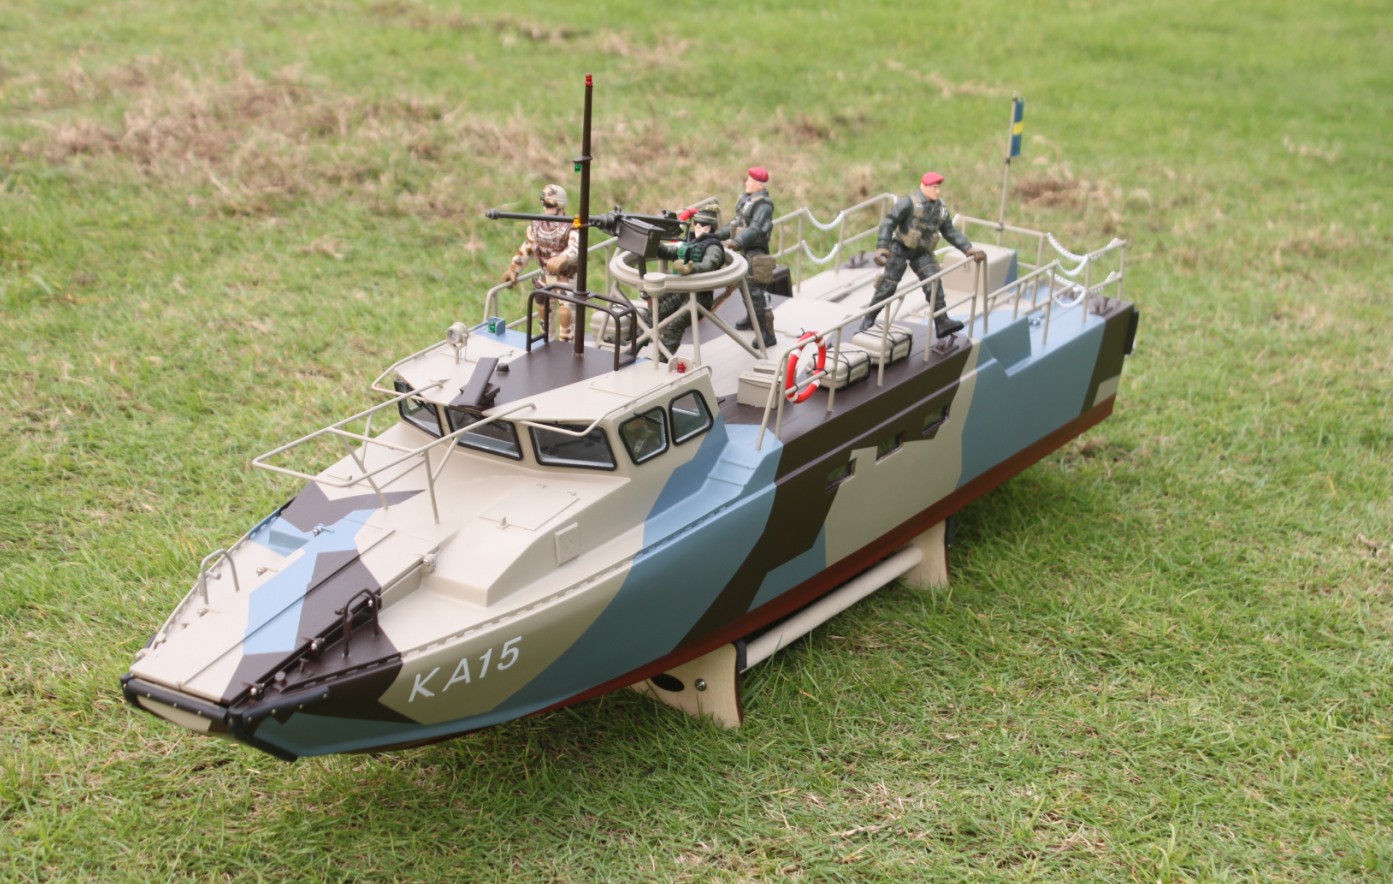 Rc Scale Model Tug Boats. Rc. RC Remote Control Helicopter ...